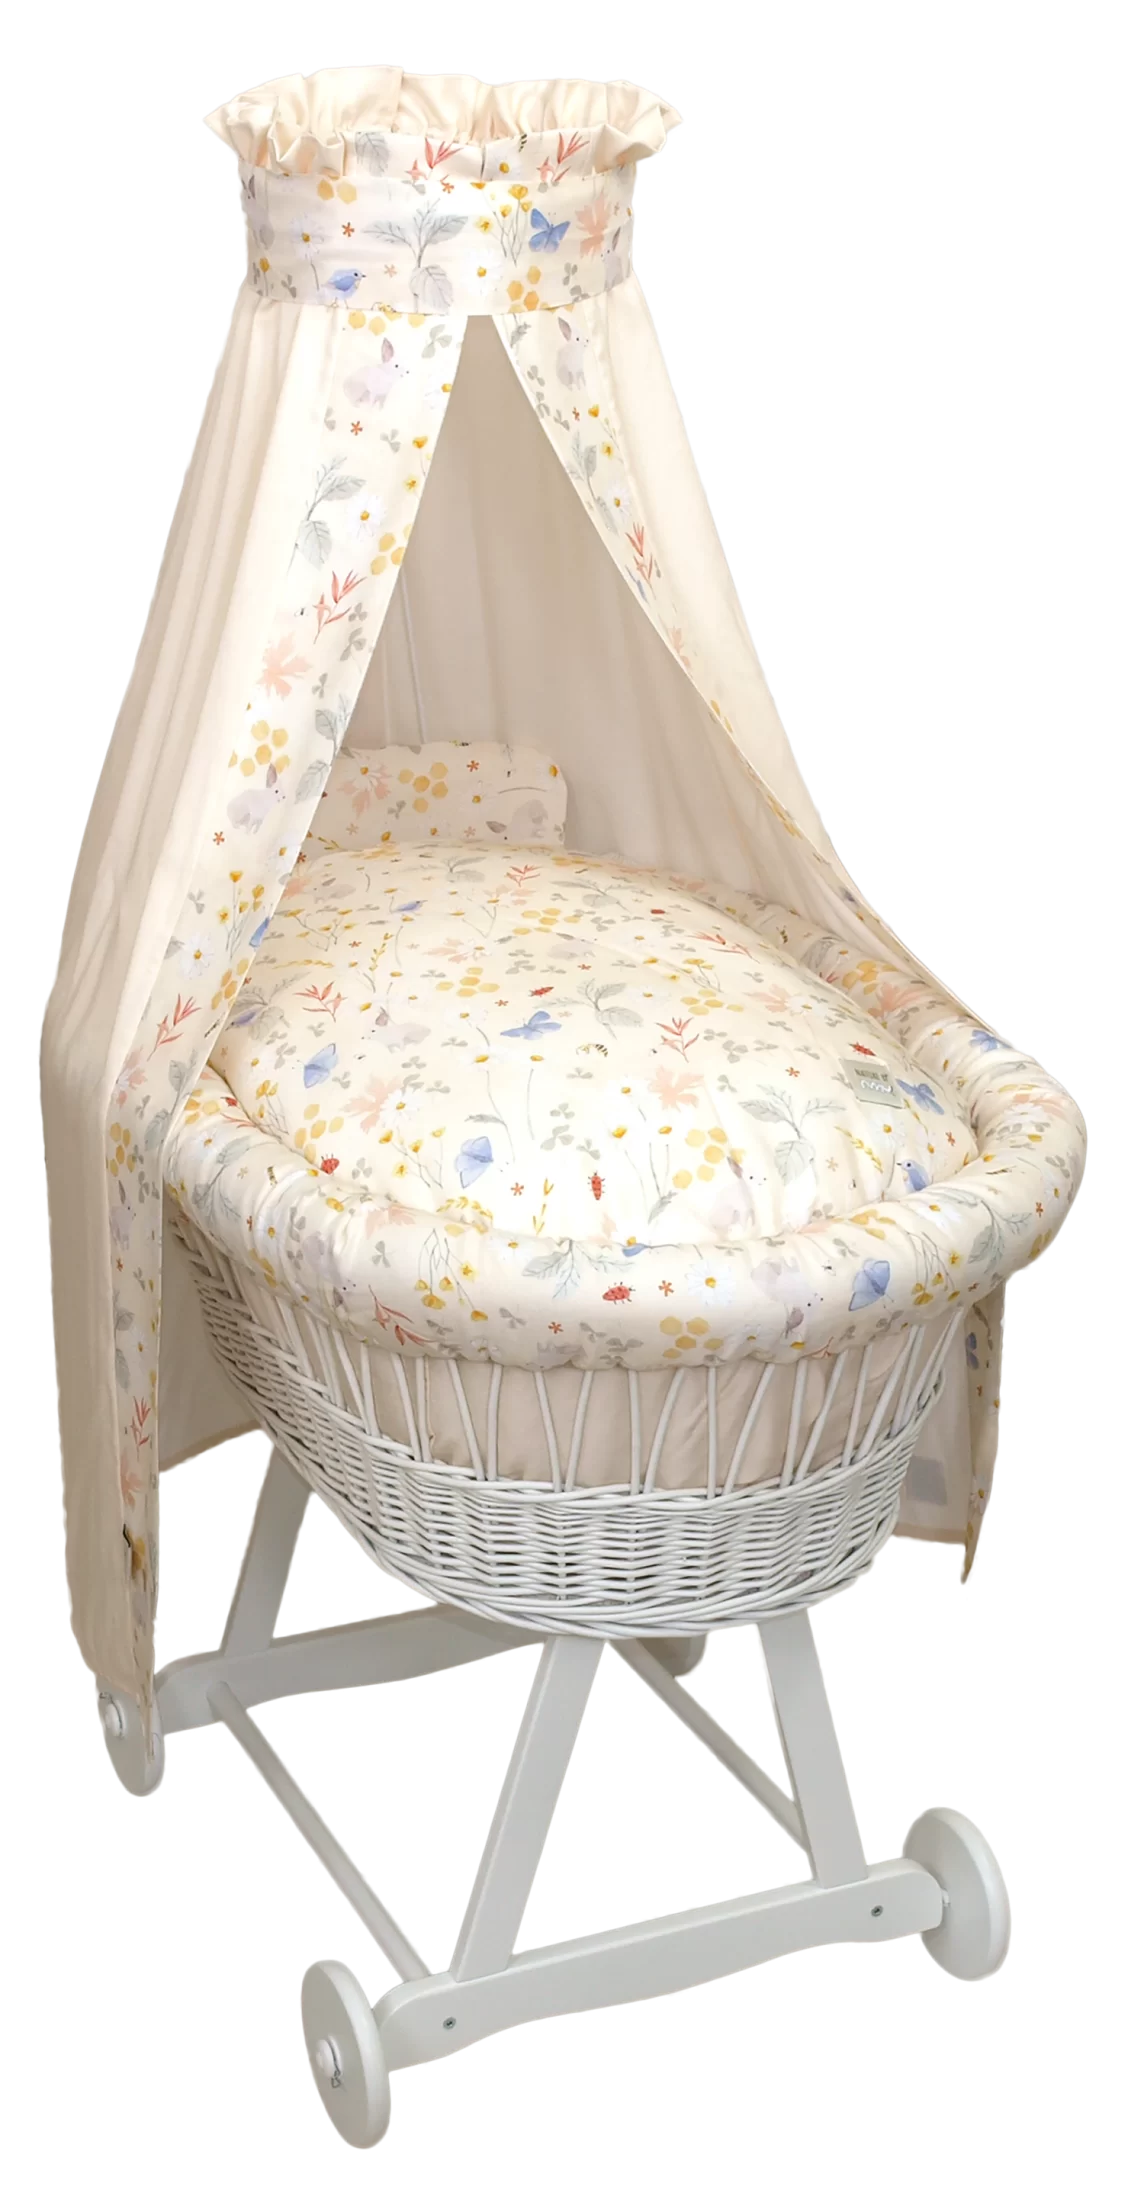 Moses Sissi Plus Amy Bamboo basket with bamboo fabric bedding Meadow Beige